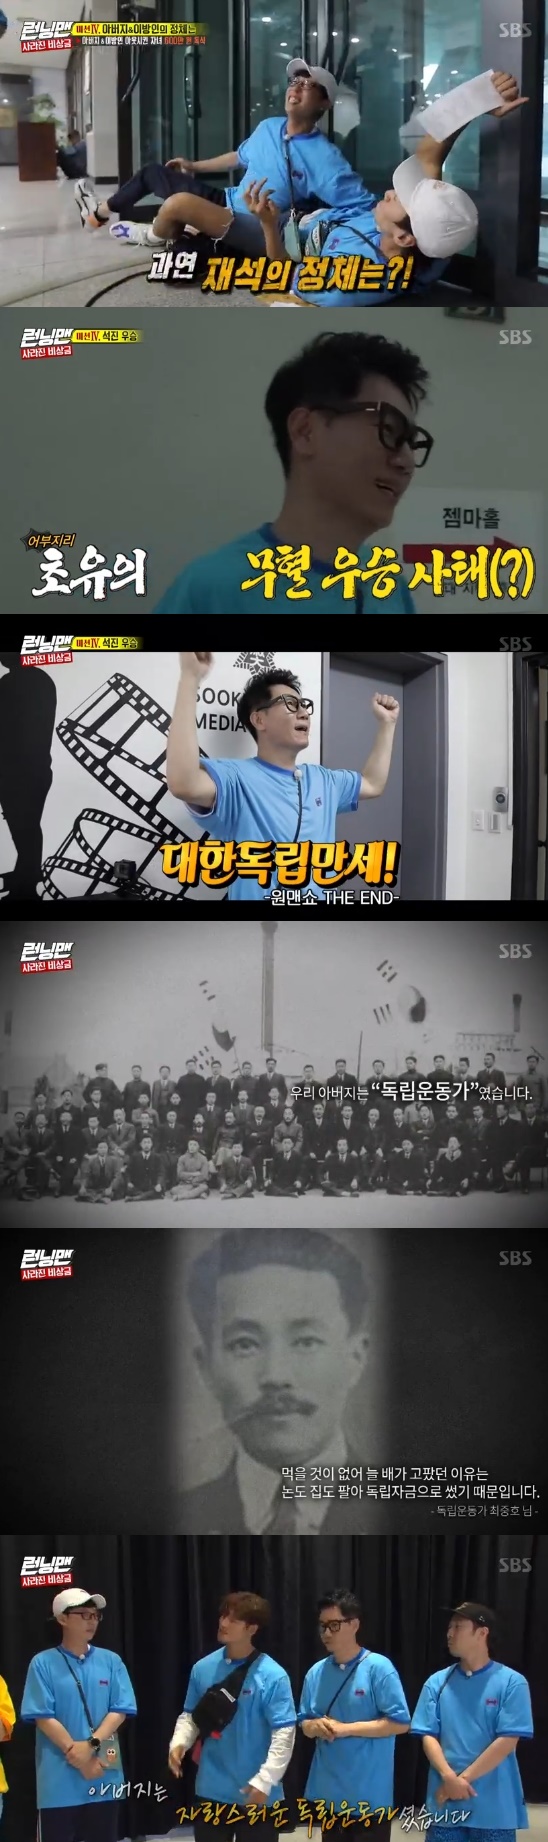 The Running Man fathers Identity was a Korean independence movement.On SBS Good Sunday - Running Man broadcast on the 18th, Ji Suk-jin won the championship.If you find 6 million won for your familys emergency fund, you will have a winning family emergency race.My father took all 6 million won in emergency money for 6 Brother and Sister, and The Stranger was trying to steal it.But my father lost his memory and remembers that he is a father.If the father finds out his identity, he will take the money, and 6 Brother and Sister will win the In-N-Out Burger, 6 Brother and Sister.The Stranger is a Central Provident Fund for every one in-N-Out Burger, and the Central Provident Fund can be obtained by in-N-Out Burger for each father.My father had withdrawn all the money and the security had been loaned because of Yi Gi, a mission that required less money because the penalties were different for each loan amount.The first mission is a lonely meal, where the least people eat free of charge, and where there are many people, you have to pay 10 times the meal.Lee Kwang-soo, Yang Se-chan, Song Ji-hyo and Haha wanted the cheapest Pyongyang cold noodles.Four people were rocked with scissors when they said they could only ride three people in a taxi, and Song Ji-hyo was missing.Following the three, Yoo Jae-Suk and Ji Suk-jin came to Pyongyangs cold noodle house and played a game for Yi Gi to give as many people as possible.But as a result, Yoo Jae-Suk, Ji Suk-jin, Haha and Lee Kwang-soo remained, and the four spent ten times the meal in the last place.Song Ji-hyo, who chose kimchi steamed alone, won a hint about his father.Jeon So-min, who won the third mission after the second mission.Members strongly doubted when Jeon So-min, who was not good at Game, won the series, and denied that he was not Jeon So-min.Jeon So-min also received hints about his father; his father works under his real name.In the final mission, Song Ji-hyo gave Lee Kwang-soo, Kim Jong-kook a decisive hint he heard from Jeon So-min.S doesnt go in, but Kim Jong-kook and Lee Kwang-soo were convinced it was a false hint given by Jeon So-min.Then her child Haha was in-N-Out Burger.Jeon So-min lay down and appealed for innocence, but Yoo Jae-Suk laughed, saying, It was the killer when I did this.After Song Ji-hyos In-N-Out Burger, Kim Jong-kook was convinced that The Stranger was in his 30s and that Jeon So-min would be The Stranger.Kim Jong-kook tore off Jeon So-mins name tag, but Jeon So-min was not The Stranger.Both were children, so they were in-N-Out Burger.The father candidates Ji Suk-jin and Yoo Jae-Suk. The two began inferring about Identity with their fathers hints; the fathers friends were Lee Sang-hwa, Lee Dong-hwi and Lee Si-young.The three characters were Korean independence movement.It was a term that meant the Japanese colonial period from 1910 to 1945, when it was dark between 7:10 pm and 7:45 pm.Ji Suk-jin, Yoo Jae-Suk thought that his fathers Identity would be a Korean independence movement.Lee Kwang-soo and Yang Se-chan later drove each other to The Stranger, and Yoo Jae-Suk asked to take the name tag of Yang Se-chan.If Yang Se-chan is not The Stranger, then you can open Lee Kwang-soos name tag.The Stranger was Yang Se-chan.Lee Kwang-soo then ripped off the name tag for Yoo Jae-Suk, but Yoo Jae-Suk shouted, Then theyre both In-N-Out Burgers.When a child opens a childs name tag, both are due to In-N-Out BurgerYi Gi.My father was Ji Suk-jin, and Ji Suk-jin won the championship in a mess; Ji Suk-jin and the members watched a video beginning, I didnt know who my father was.It was a video about the descendants of Korean independence movement who misunderstood the father who had to hide Identity.6 million won is the independent fund that Udang Lee Hoi-young used to establish an emerging school.The production team said that The Strangers identity symbolized someone who was indifferent to the Japanese, pro-Japanese Korean independence movement.The final prize money will be donated in the name of Ji Suk-jin, he added.Photo = SBS Broadcasting Screen